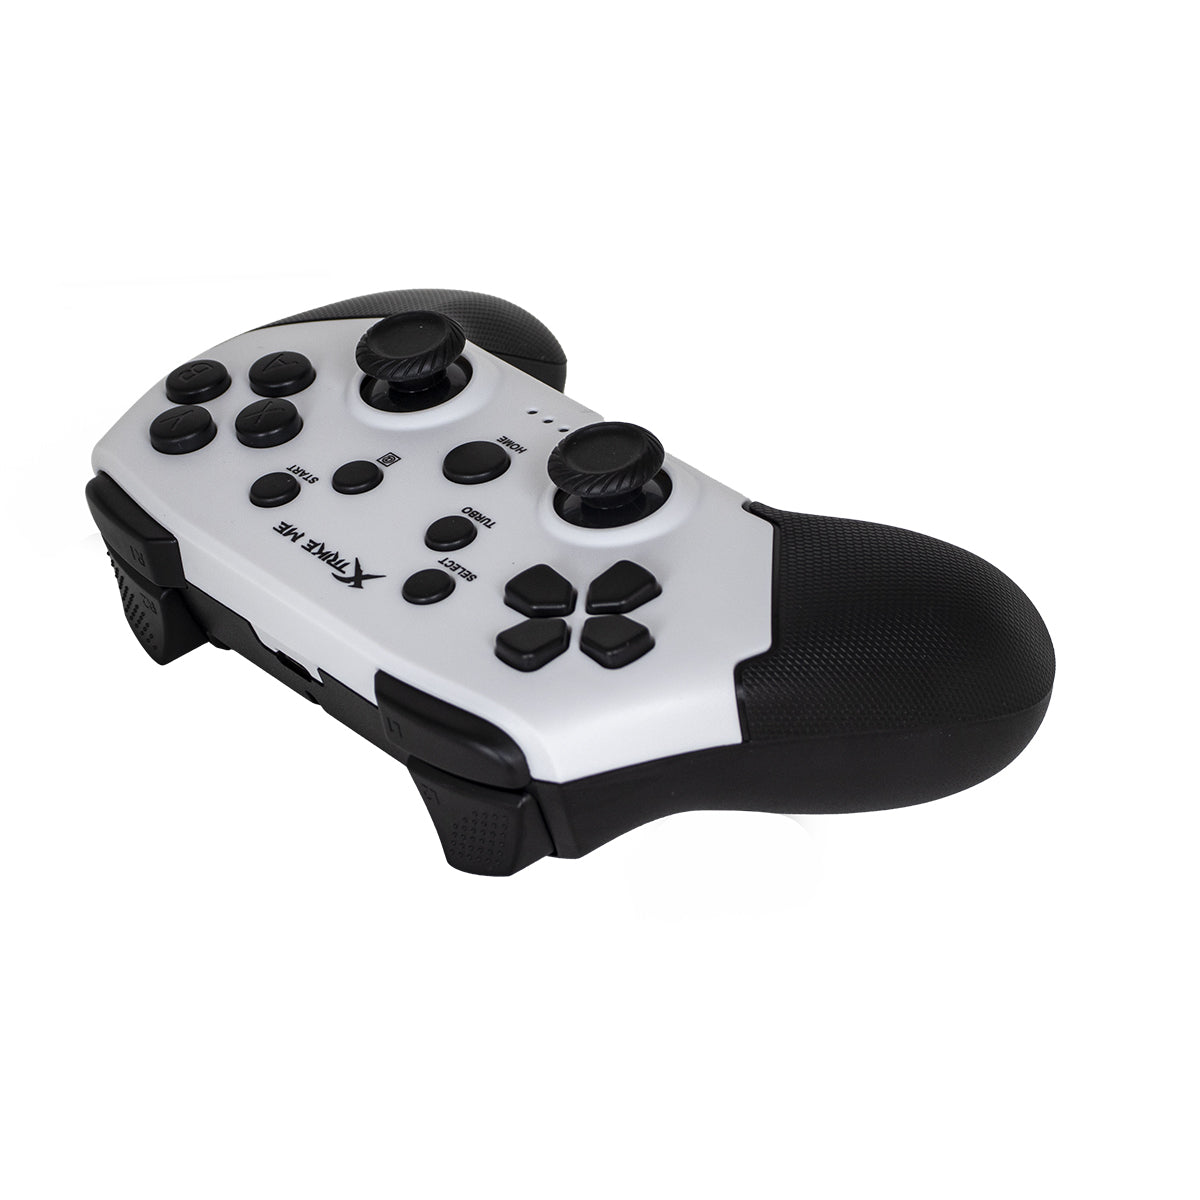 Joystick Inalambrico Wireless Ps4 Ps3 Switch Android iPhone